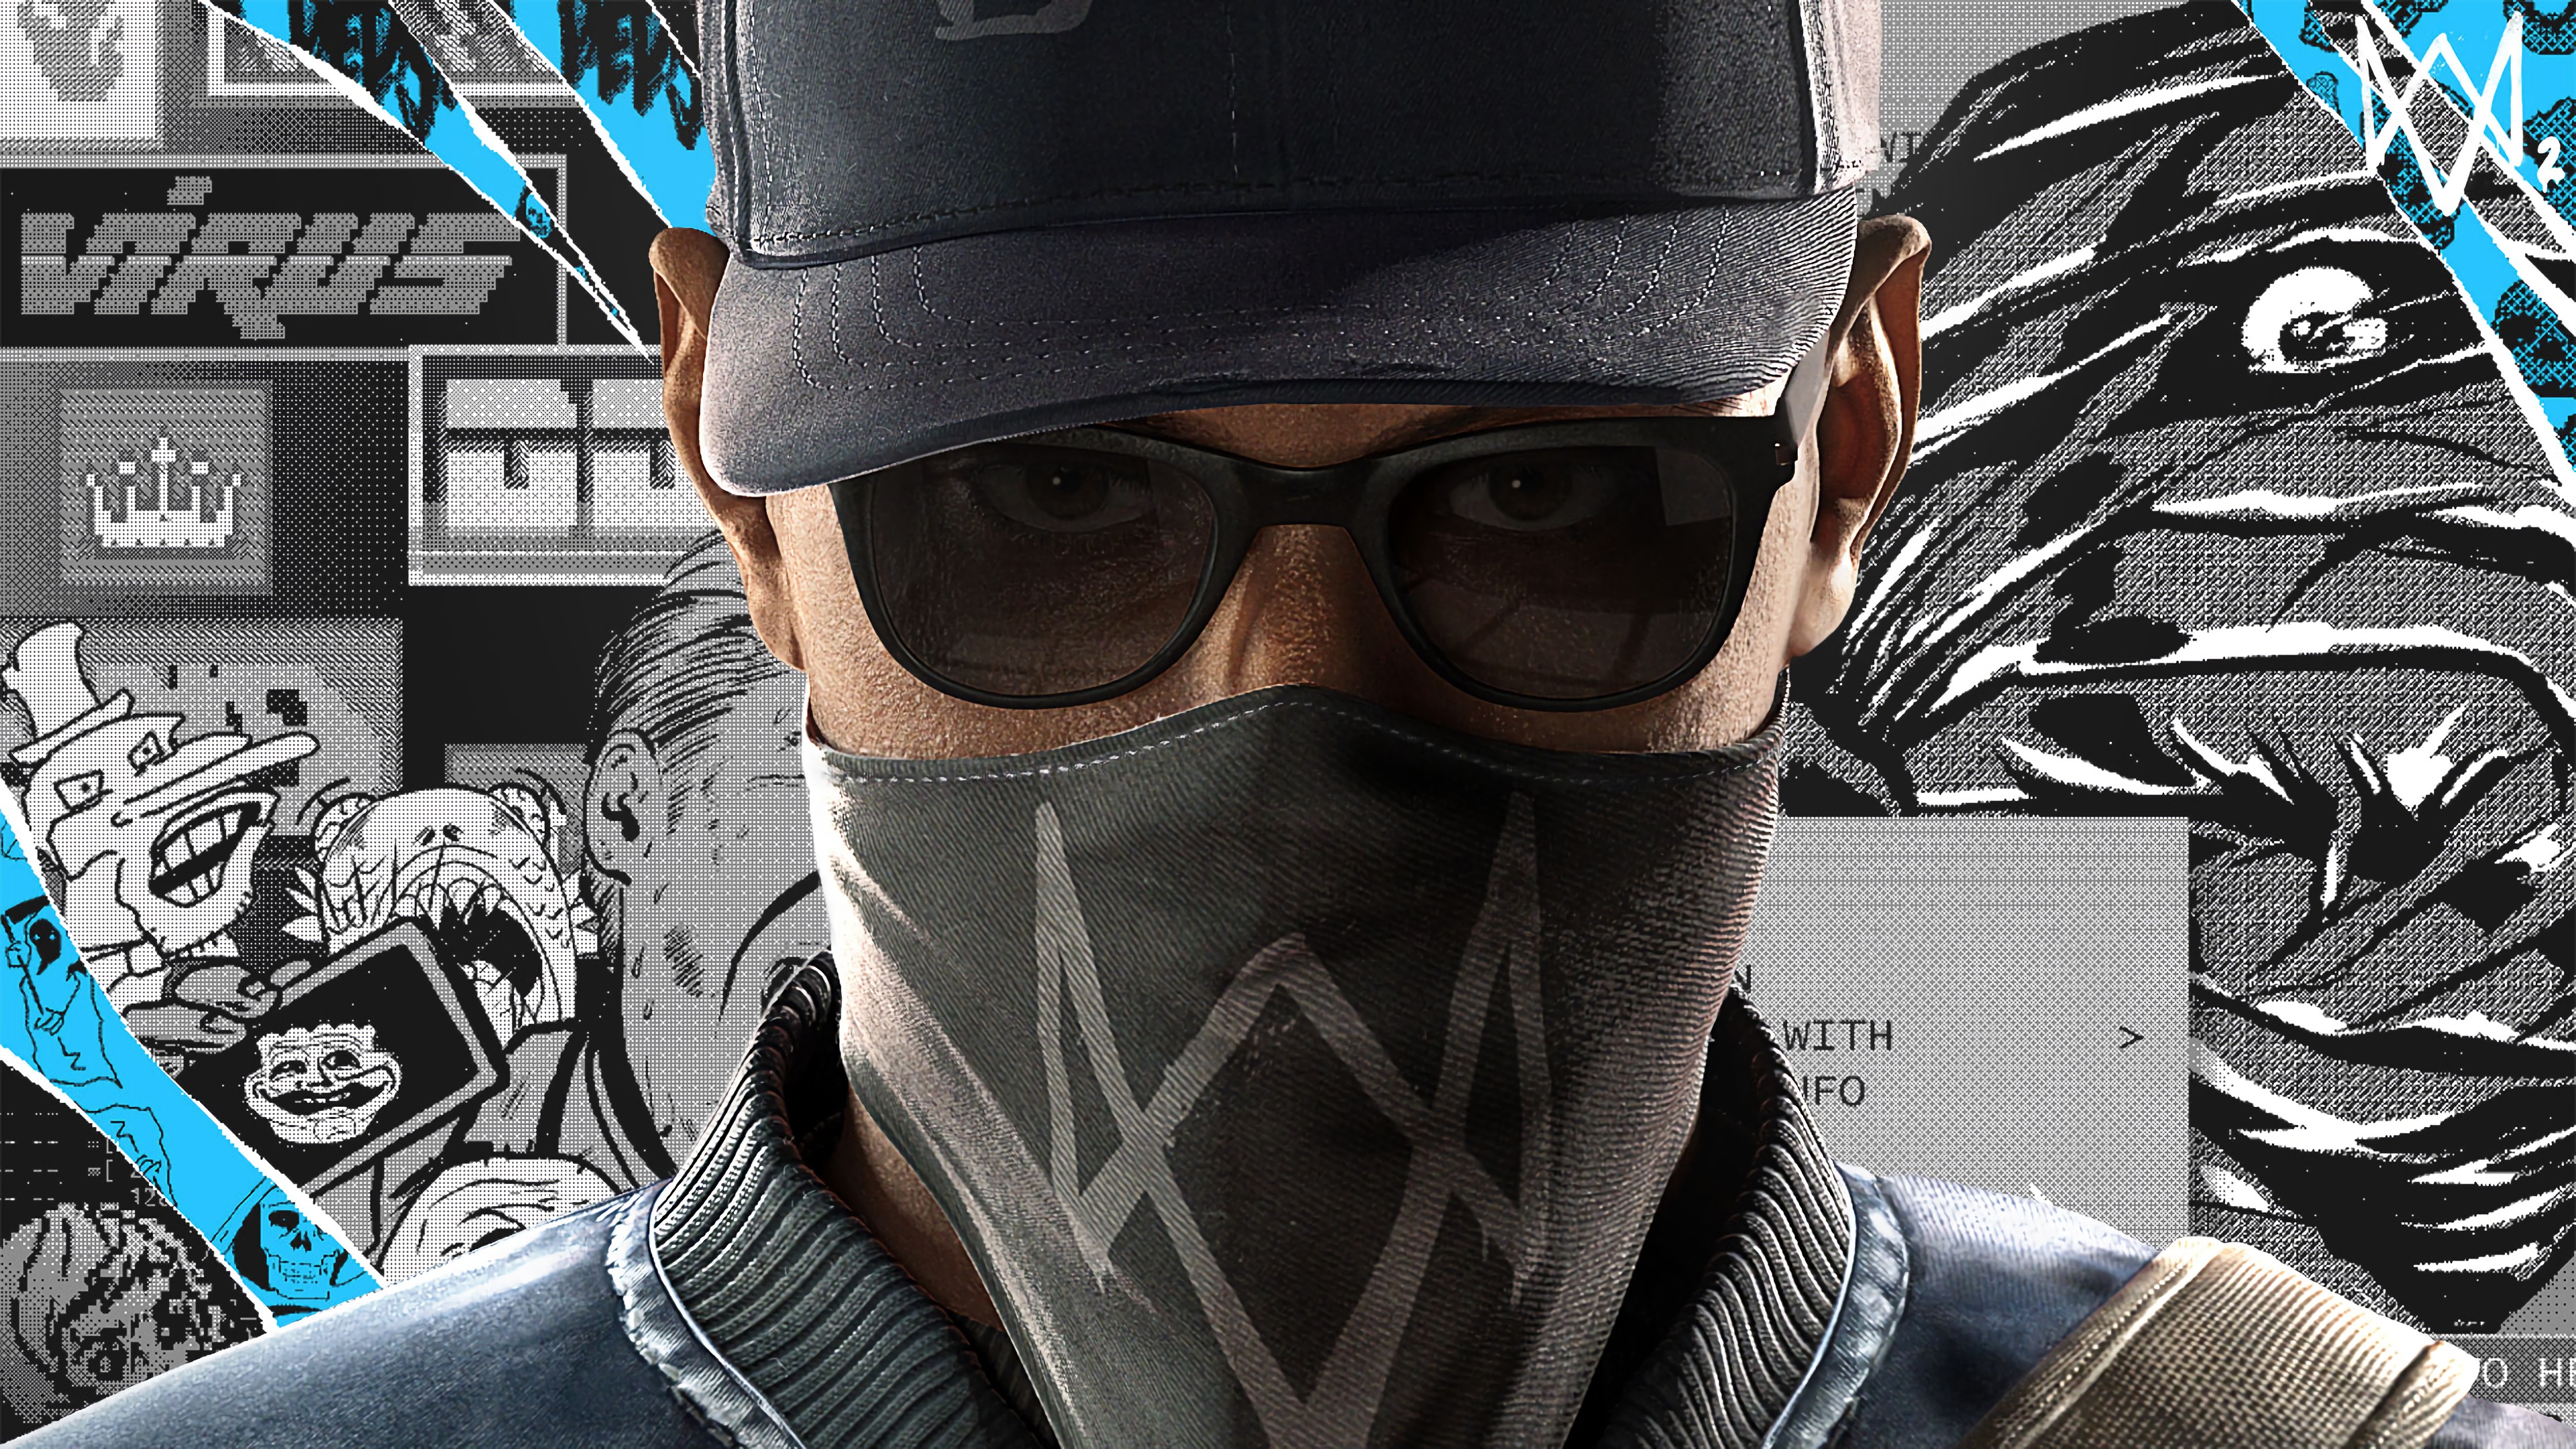 Watch Dogs 2 Marcus Holloway Face Wallpaper Hd Games 4k Wallpapers Images Photos And Background Wallpapers Den